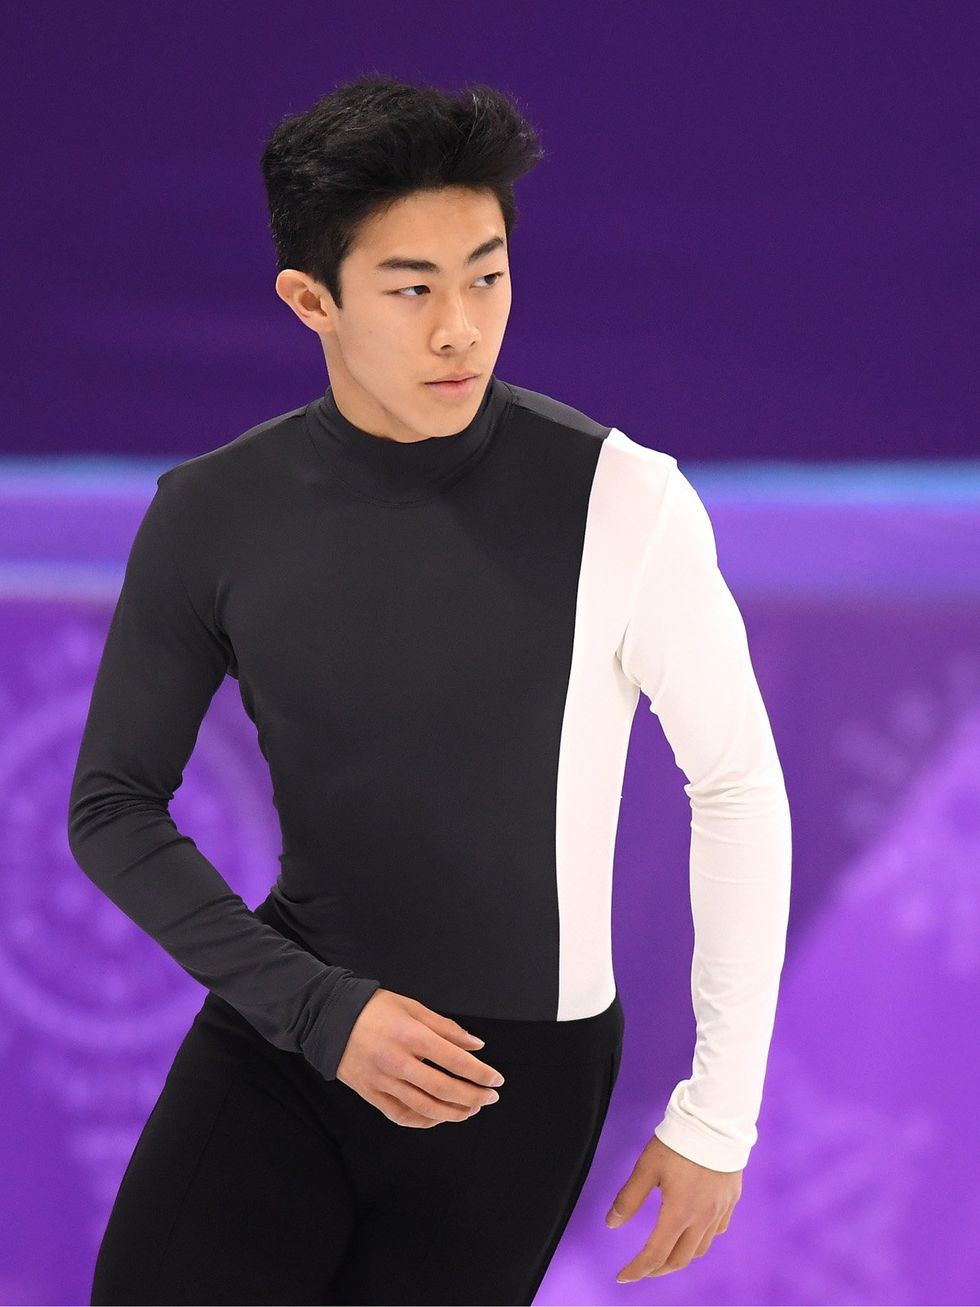 Ear, Sleeve, Human body, Shoulder, Hand, Joint, Standing, Elbow, Purple, Fashion, 